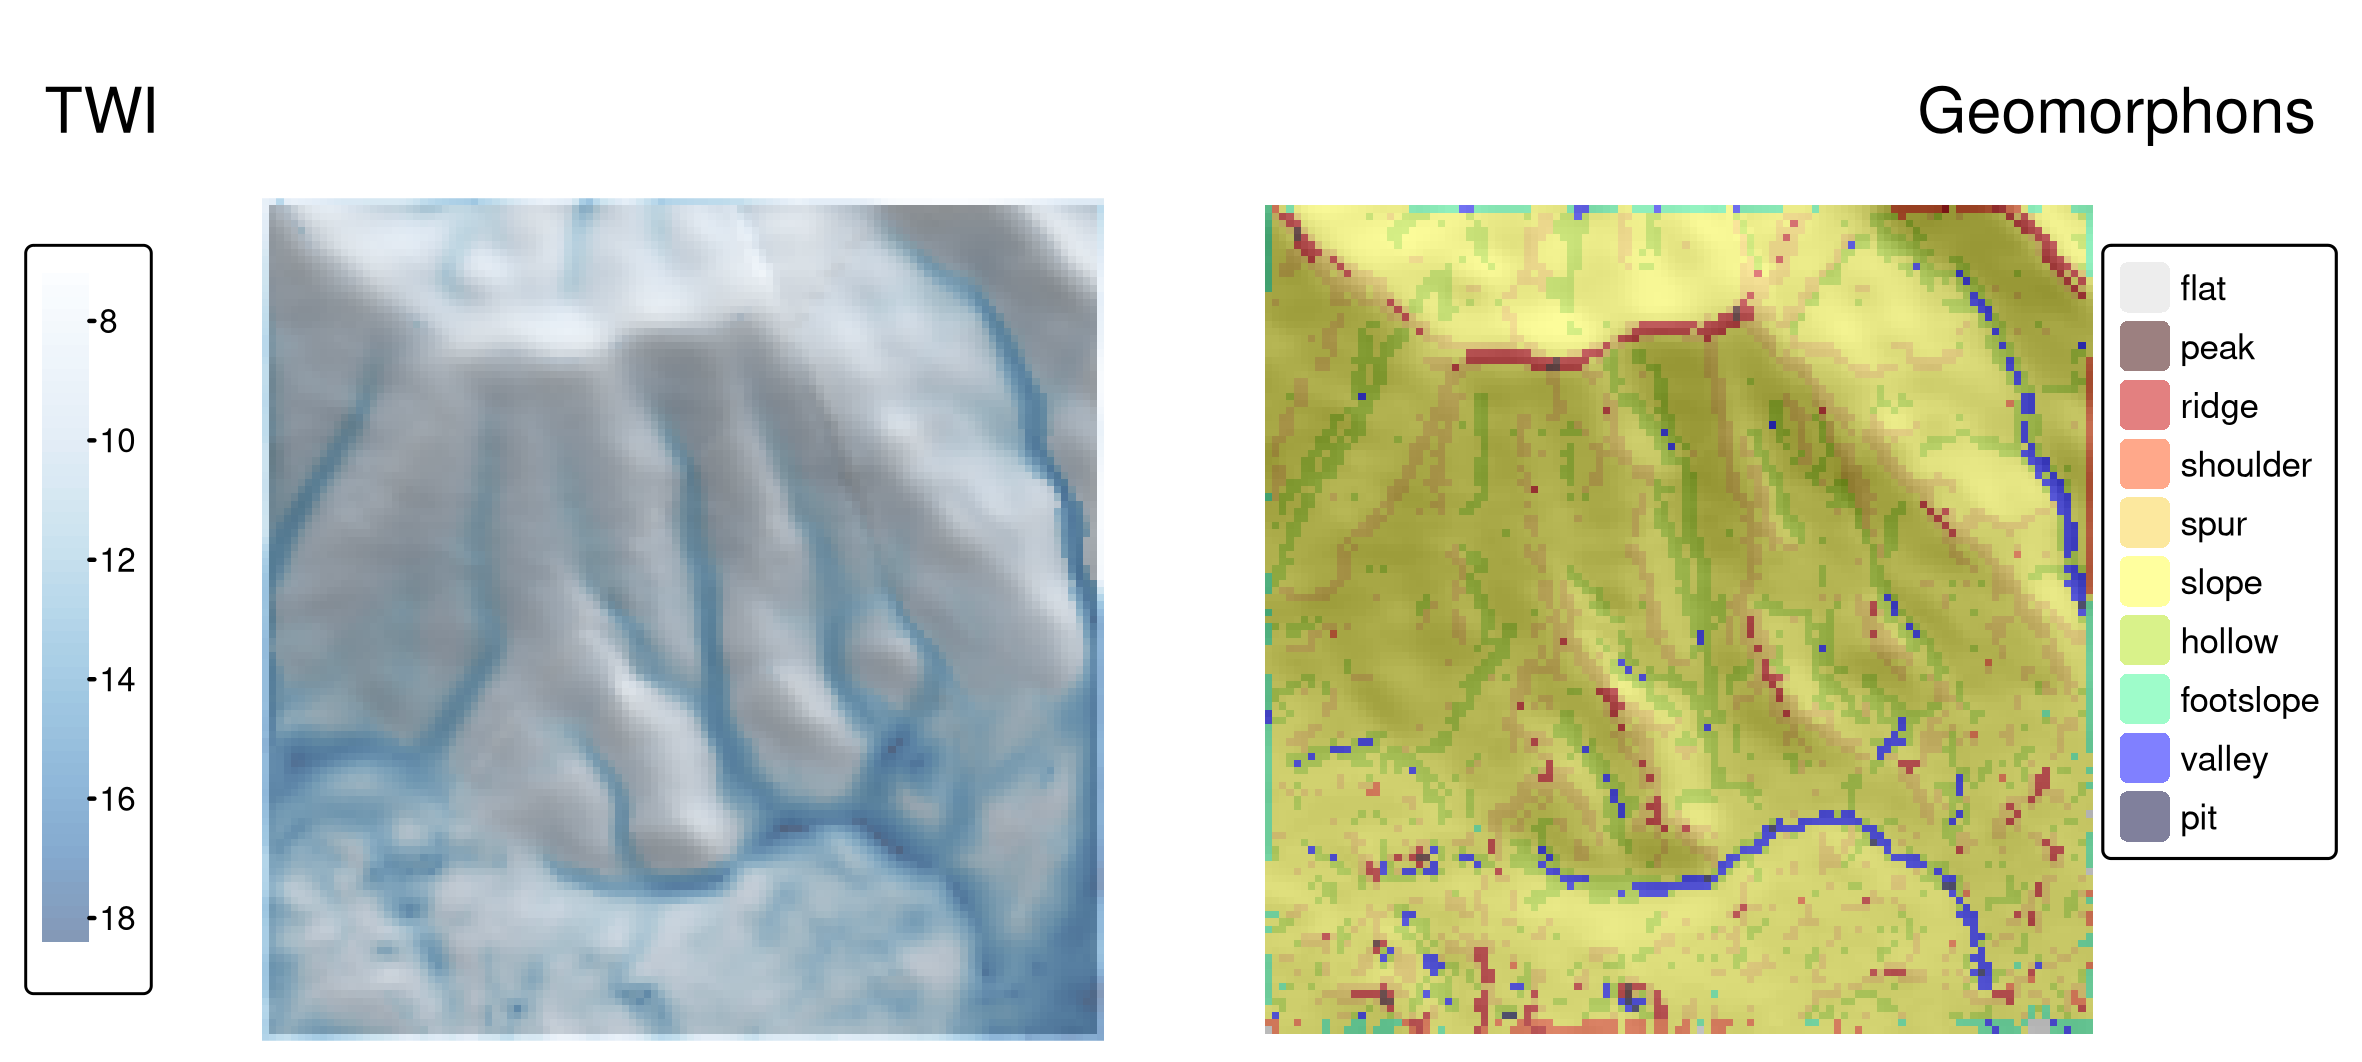 Topographic wetness index (TWI, left panel) and geomorphons (right panel) derived for the Mongón study area.